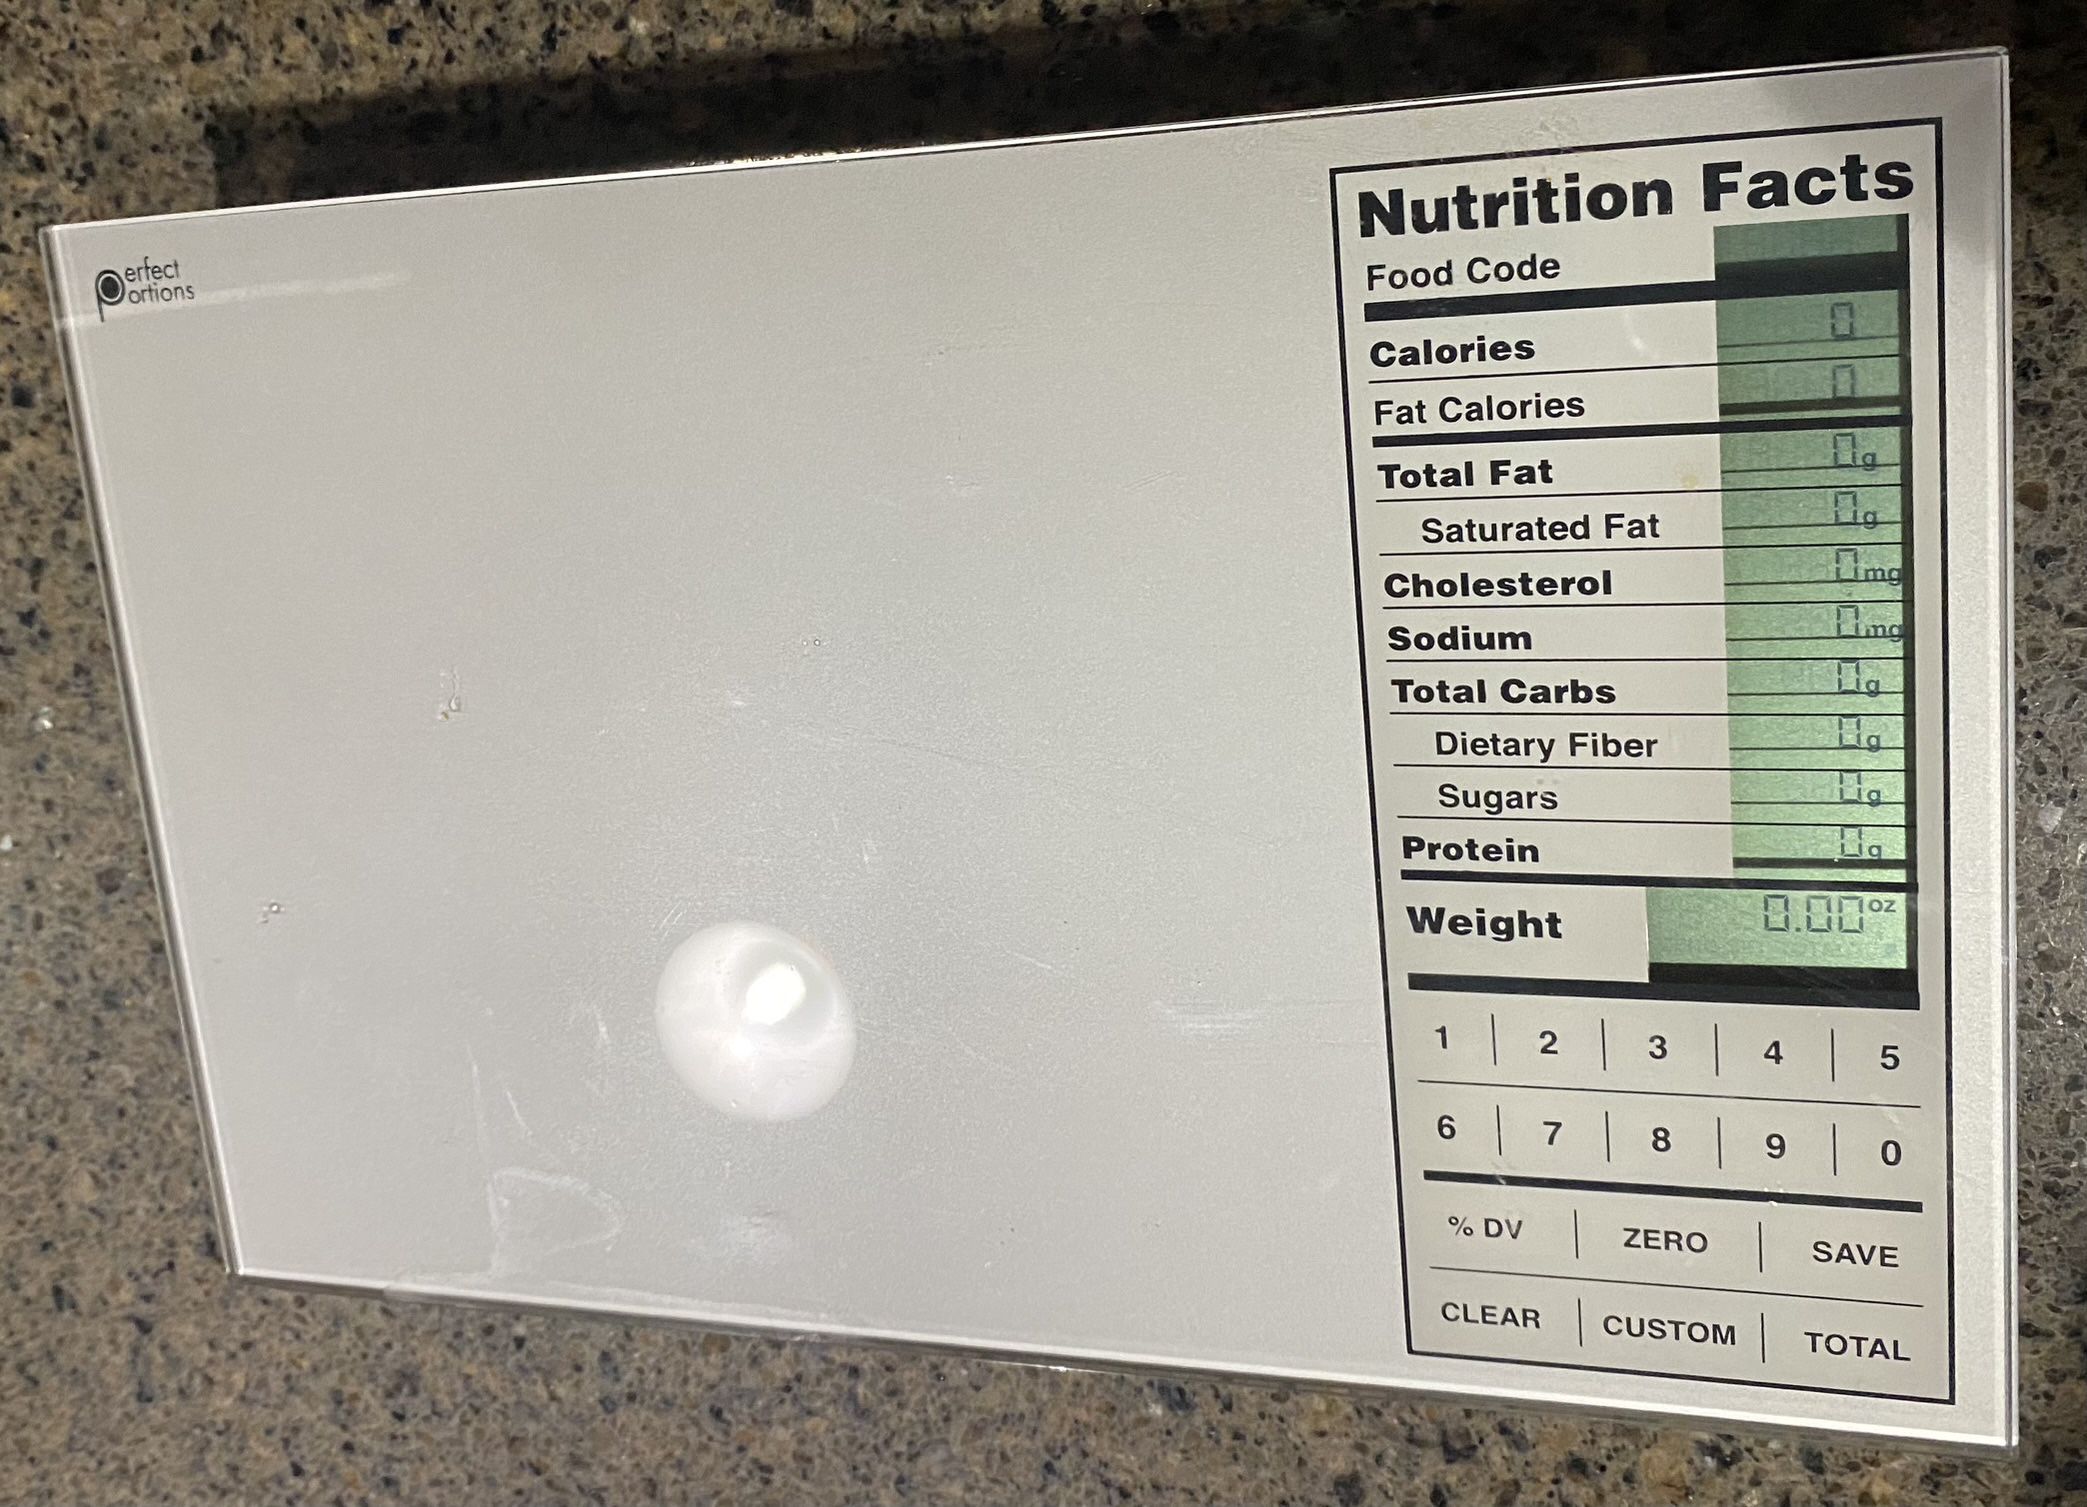 Nutrition Food Scale, Perfect for Weighing Nutritional Meals, Calculating Food Facts, and Portioning Snacks